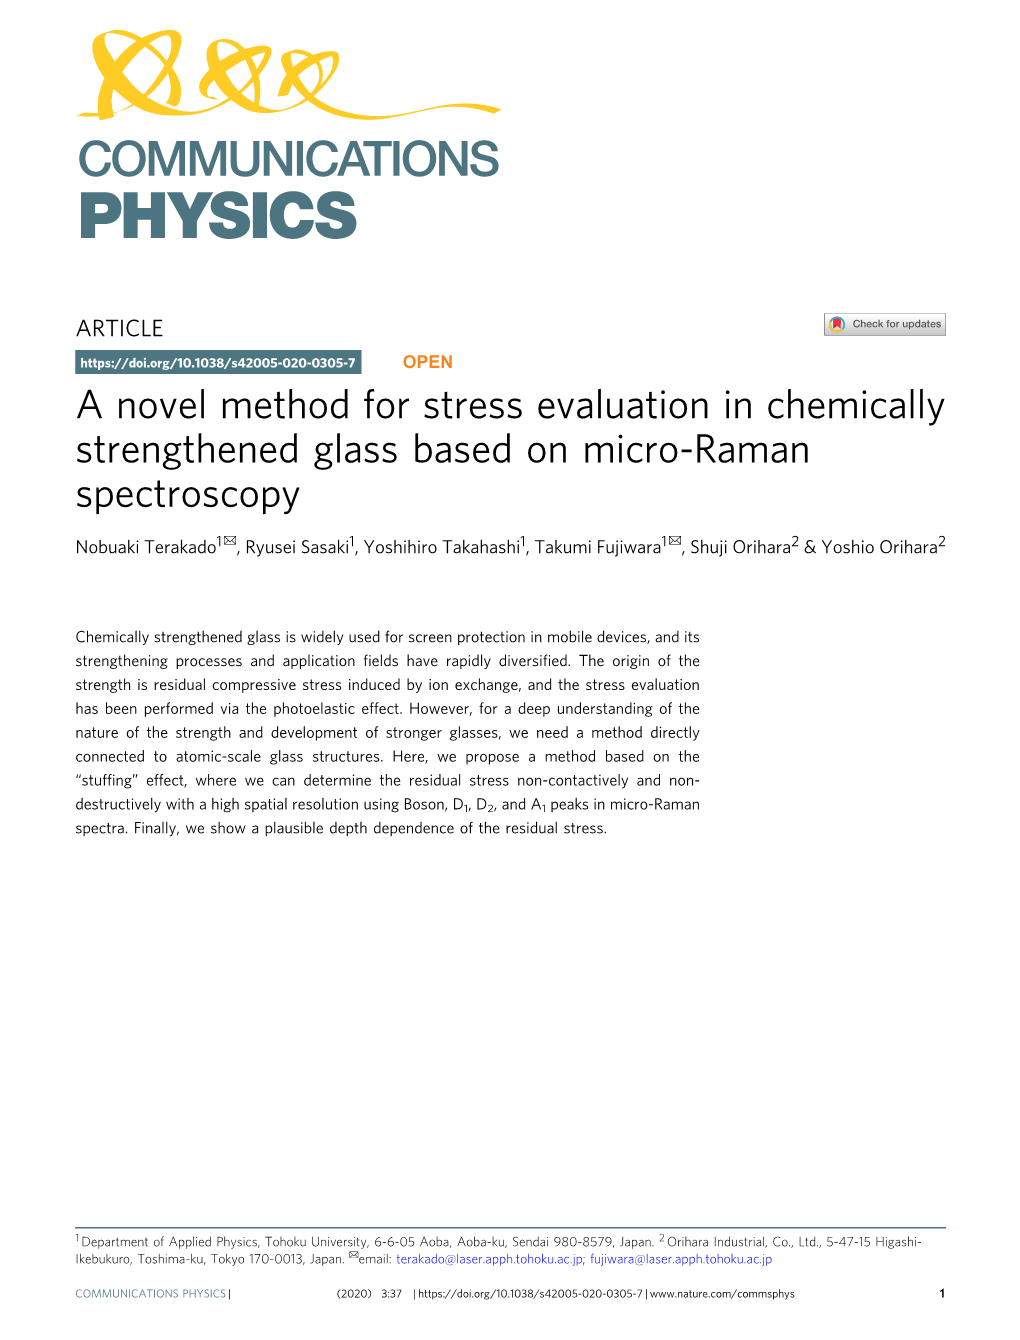 A Novel Method for Stress Evaluation in Chemically Strengthened Glass